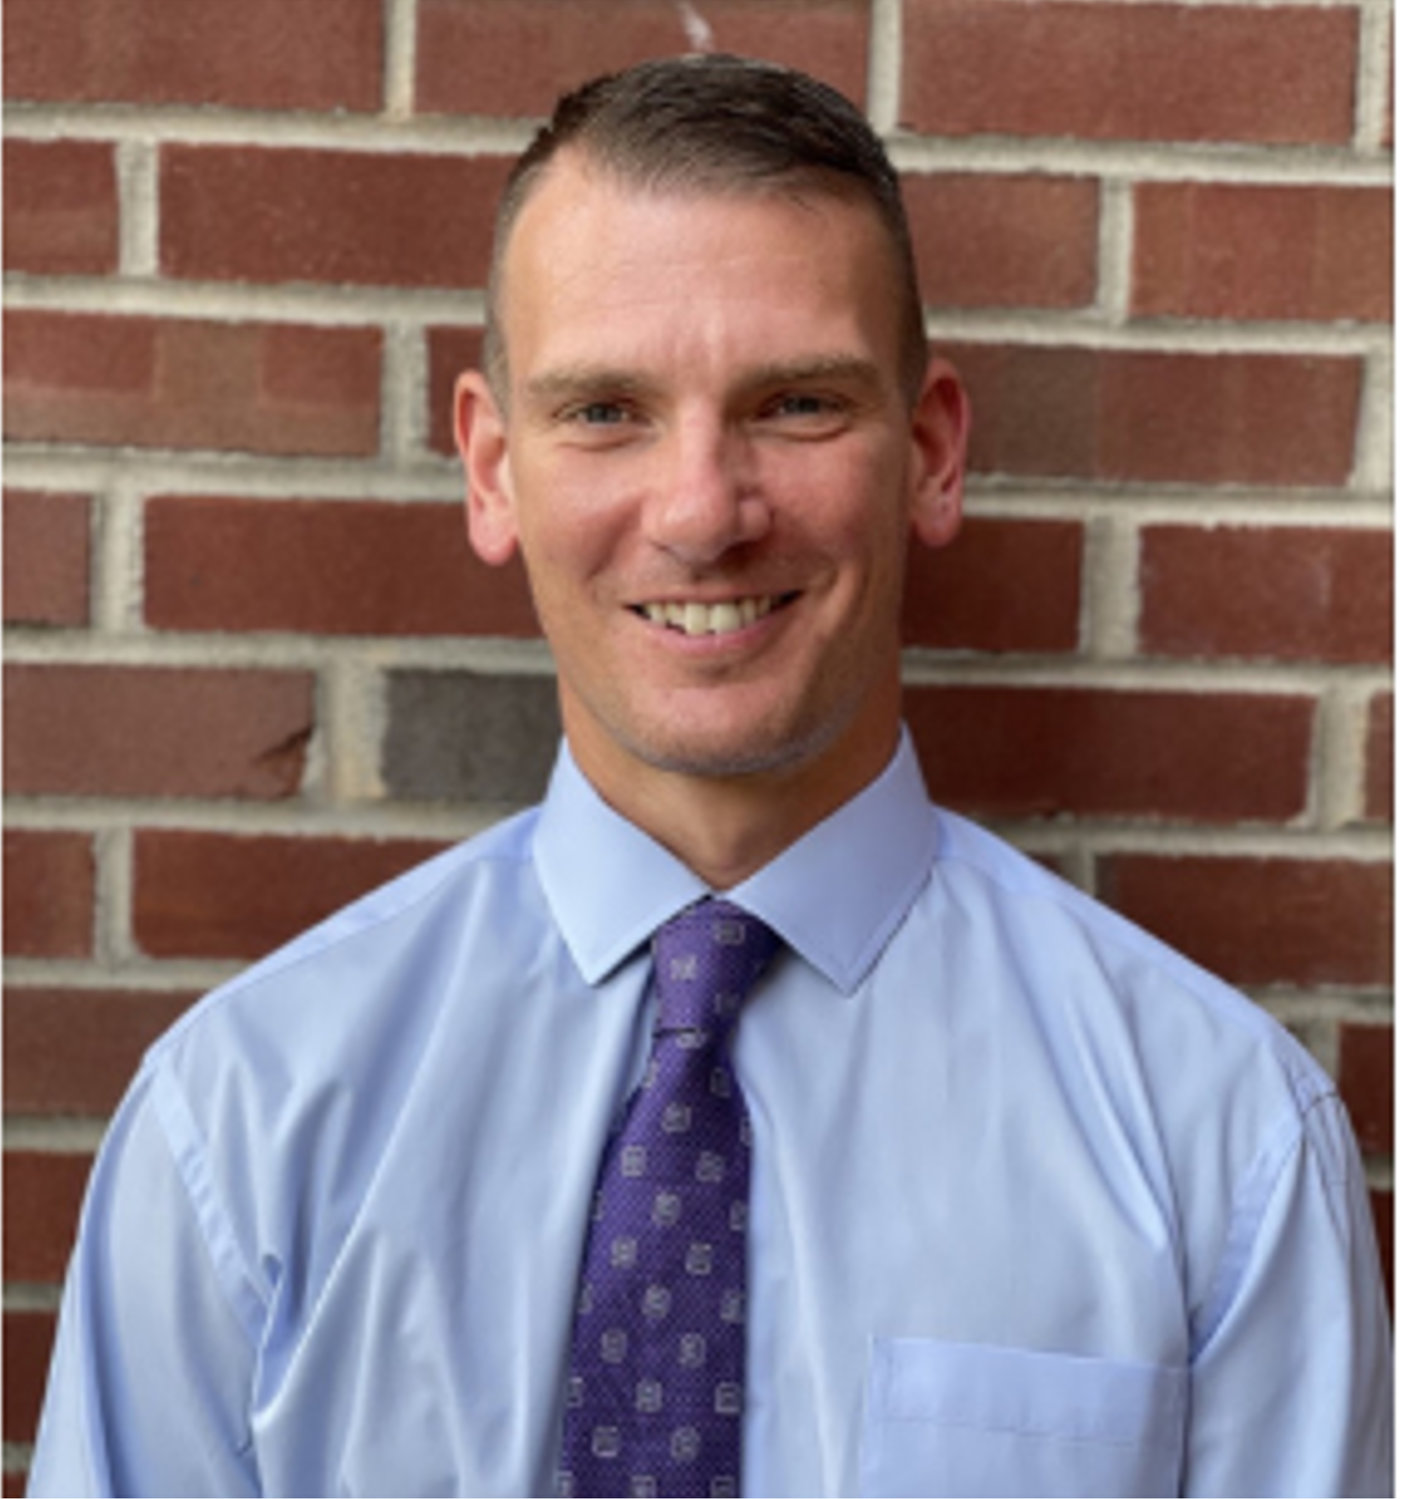 Charles Rizzuto, the 2022 Eastern District Teacher of the Year for High School Physical Education, has been honored before. In 2020 he was named the Secondary Teacher of the Year by the New York State Association for Health, Physical Education, Recreation and Dance.